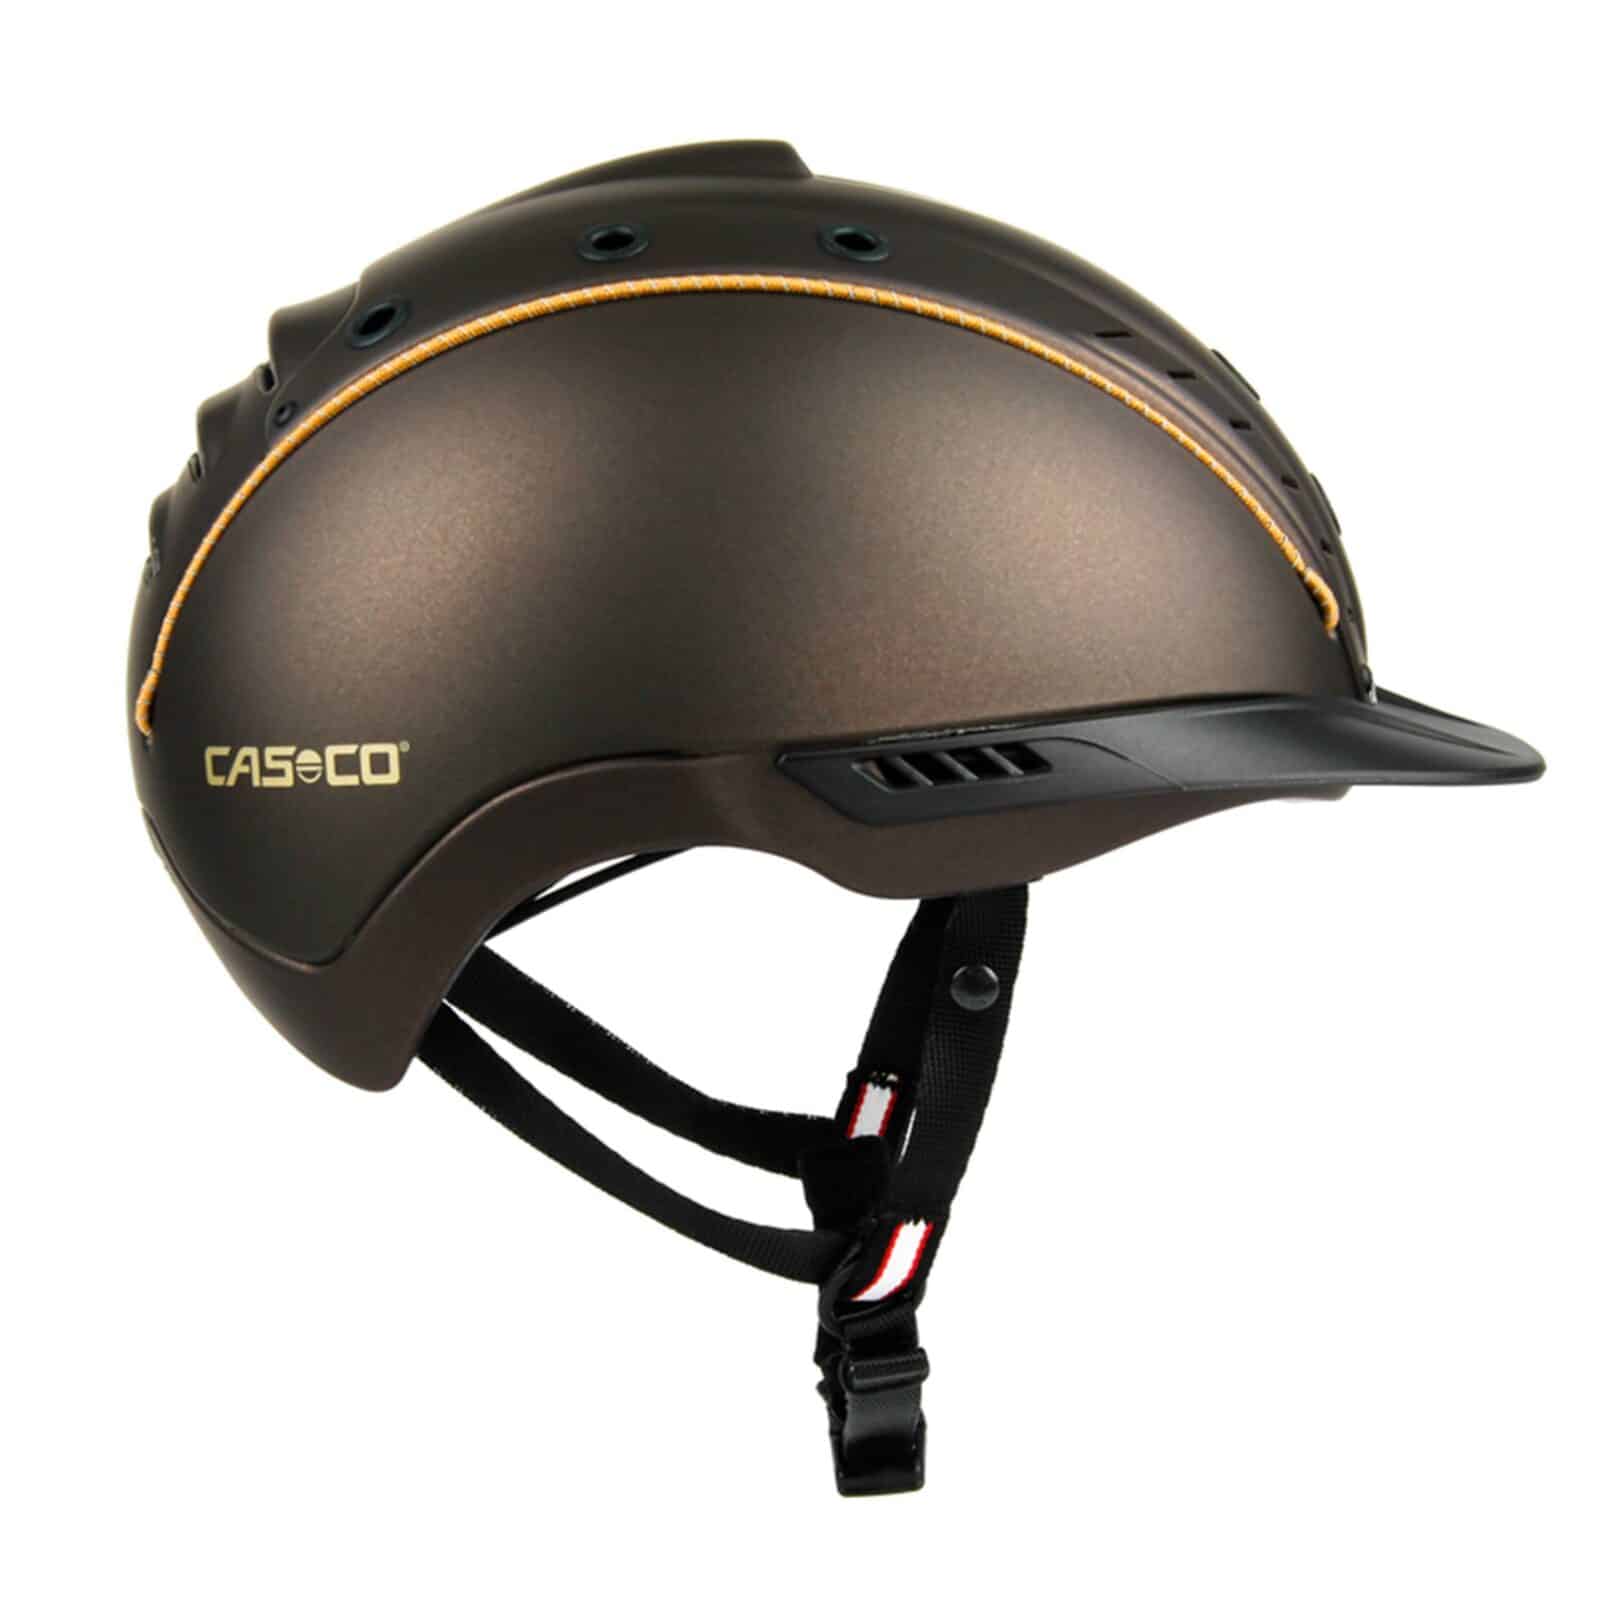 315049 Product scaled Casco Reithelm Mistrall 2